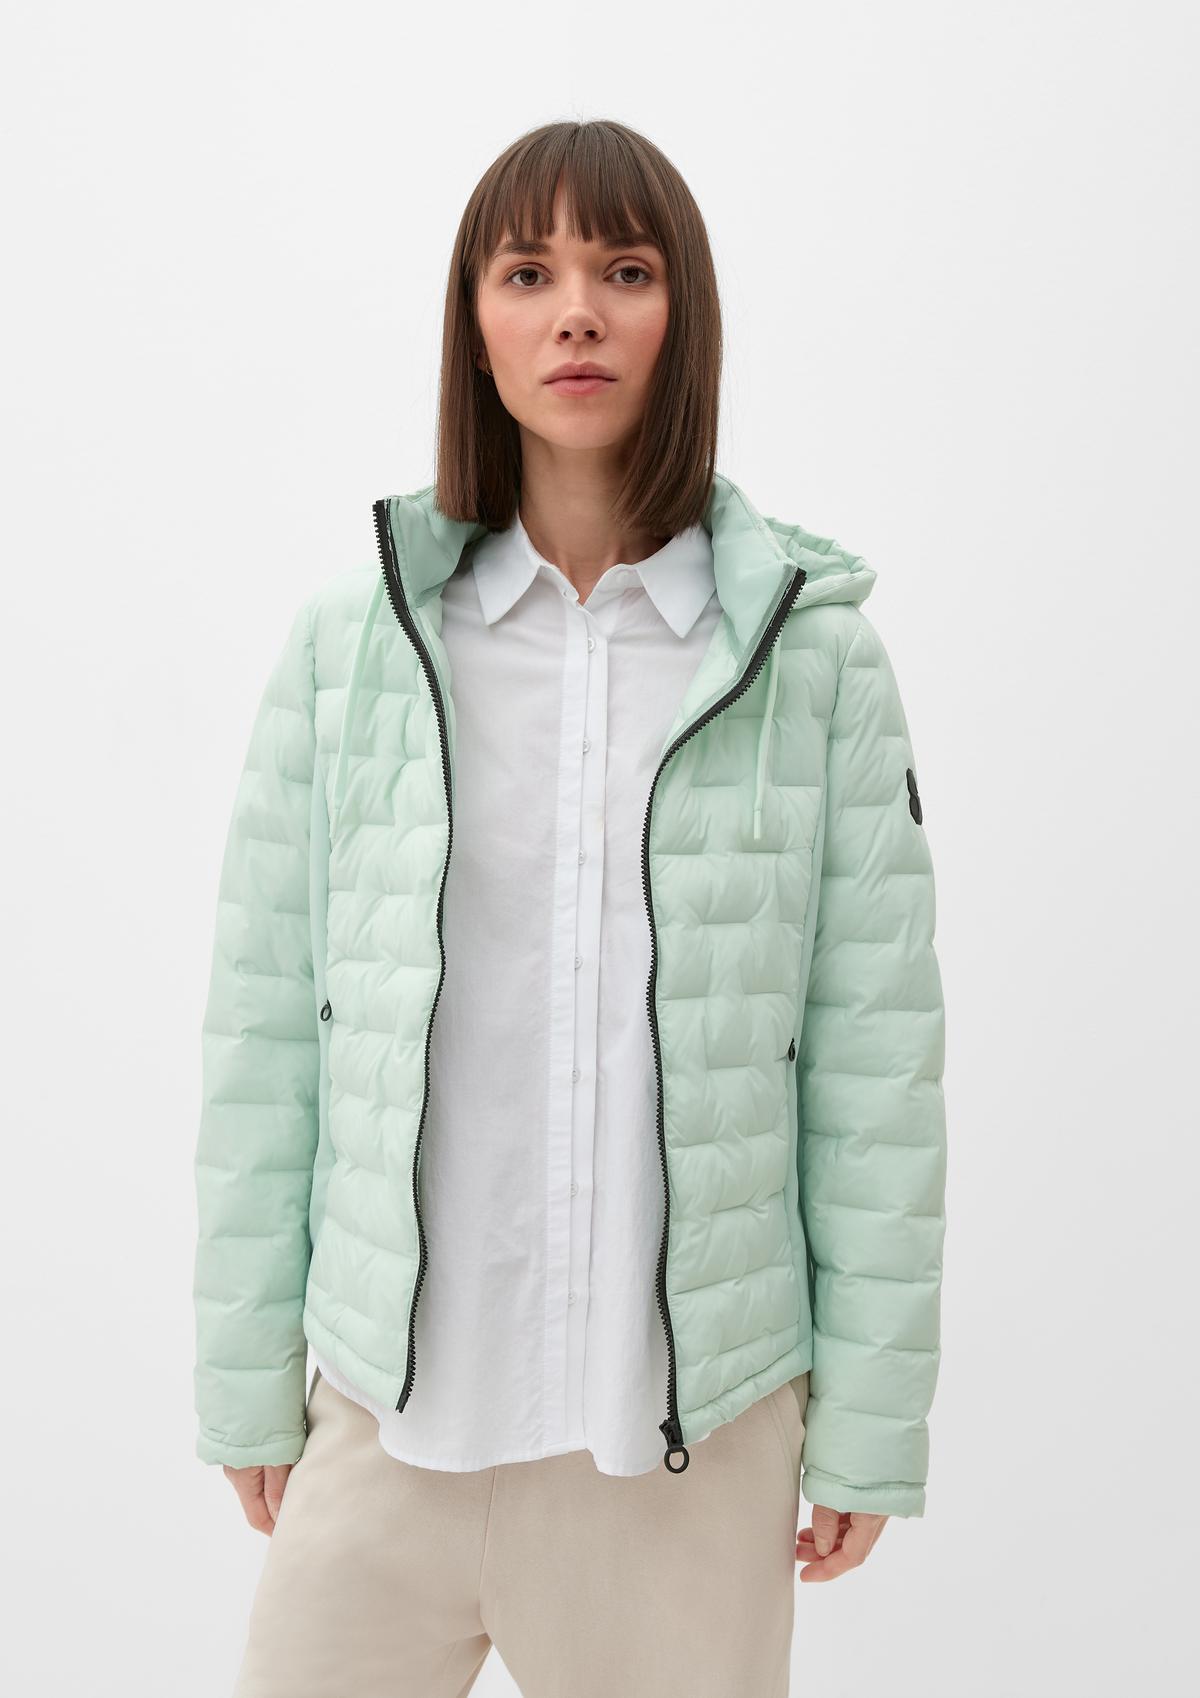 Padded outdoor jacket in offwhite mix - a of materials